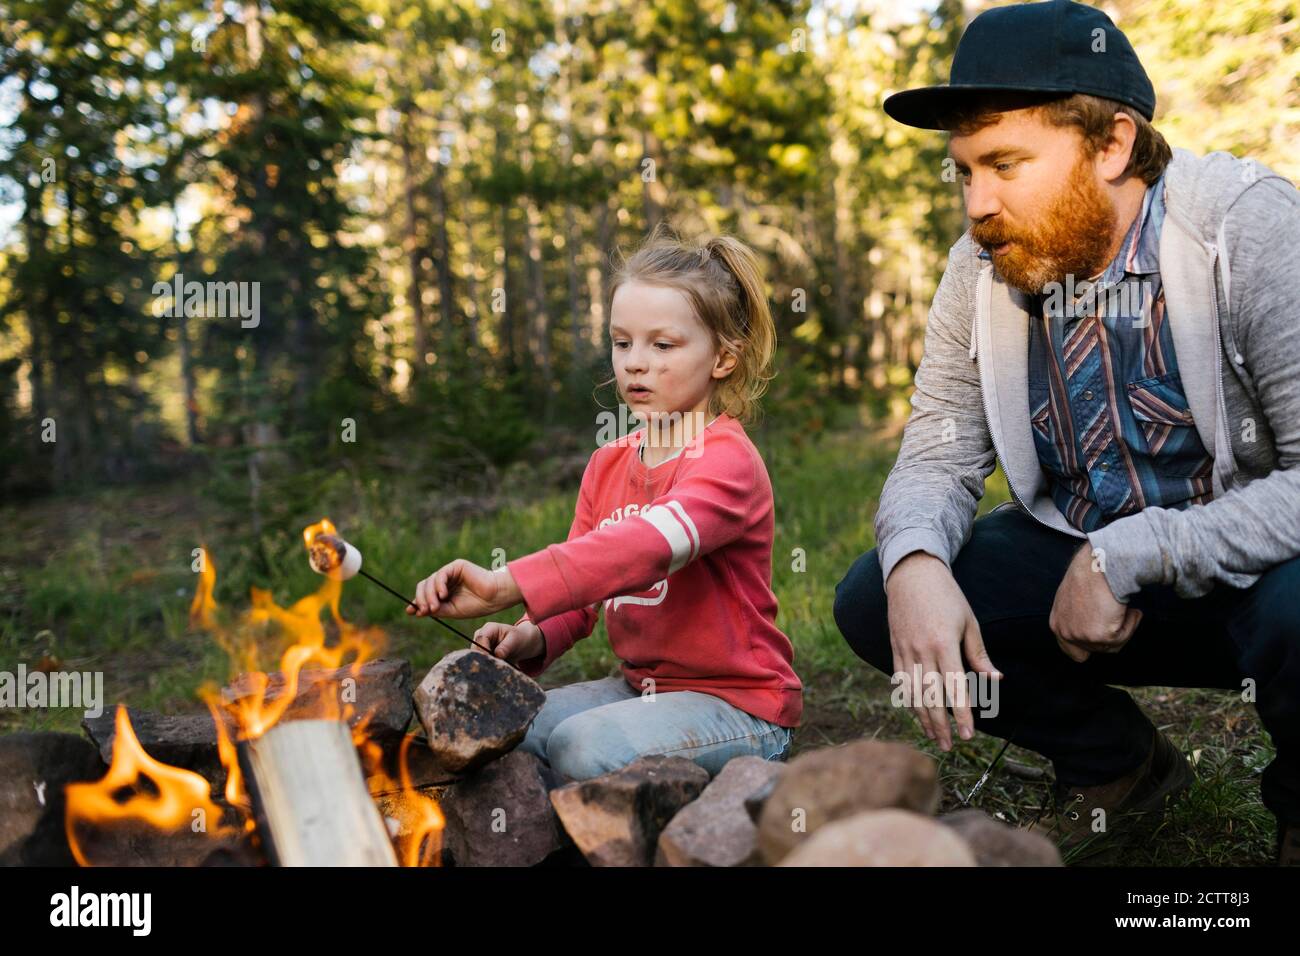 Man with daughter (6-7) roasting marshmallow above campfire, Wasatch Cache National Forest Stock Photo